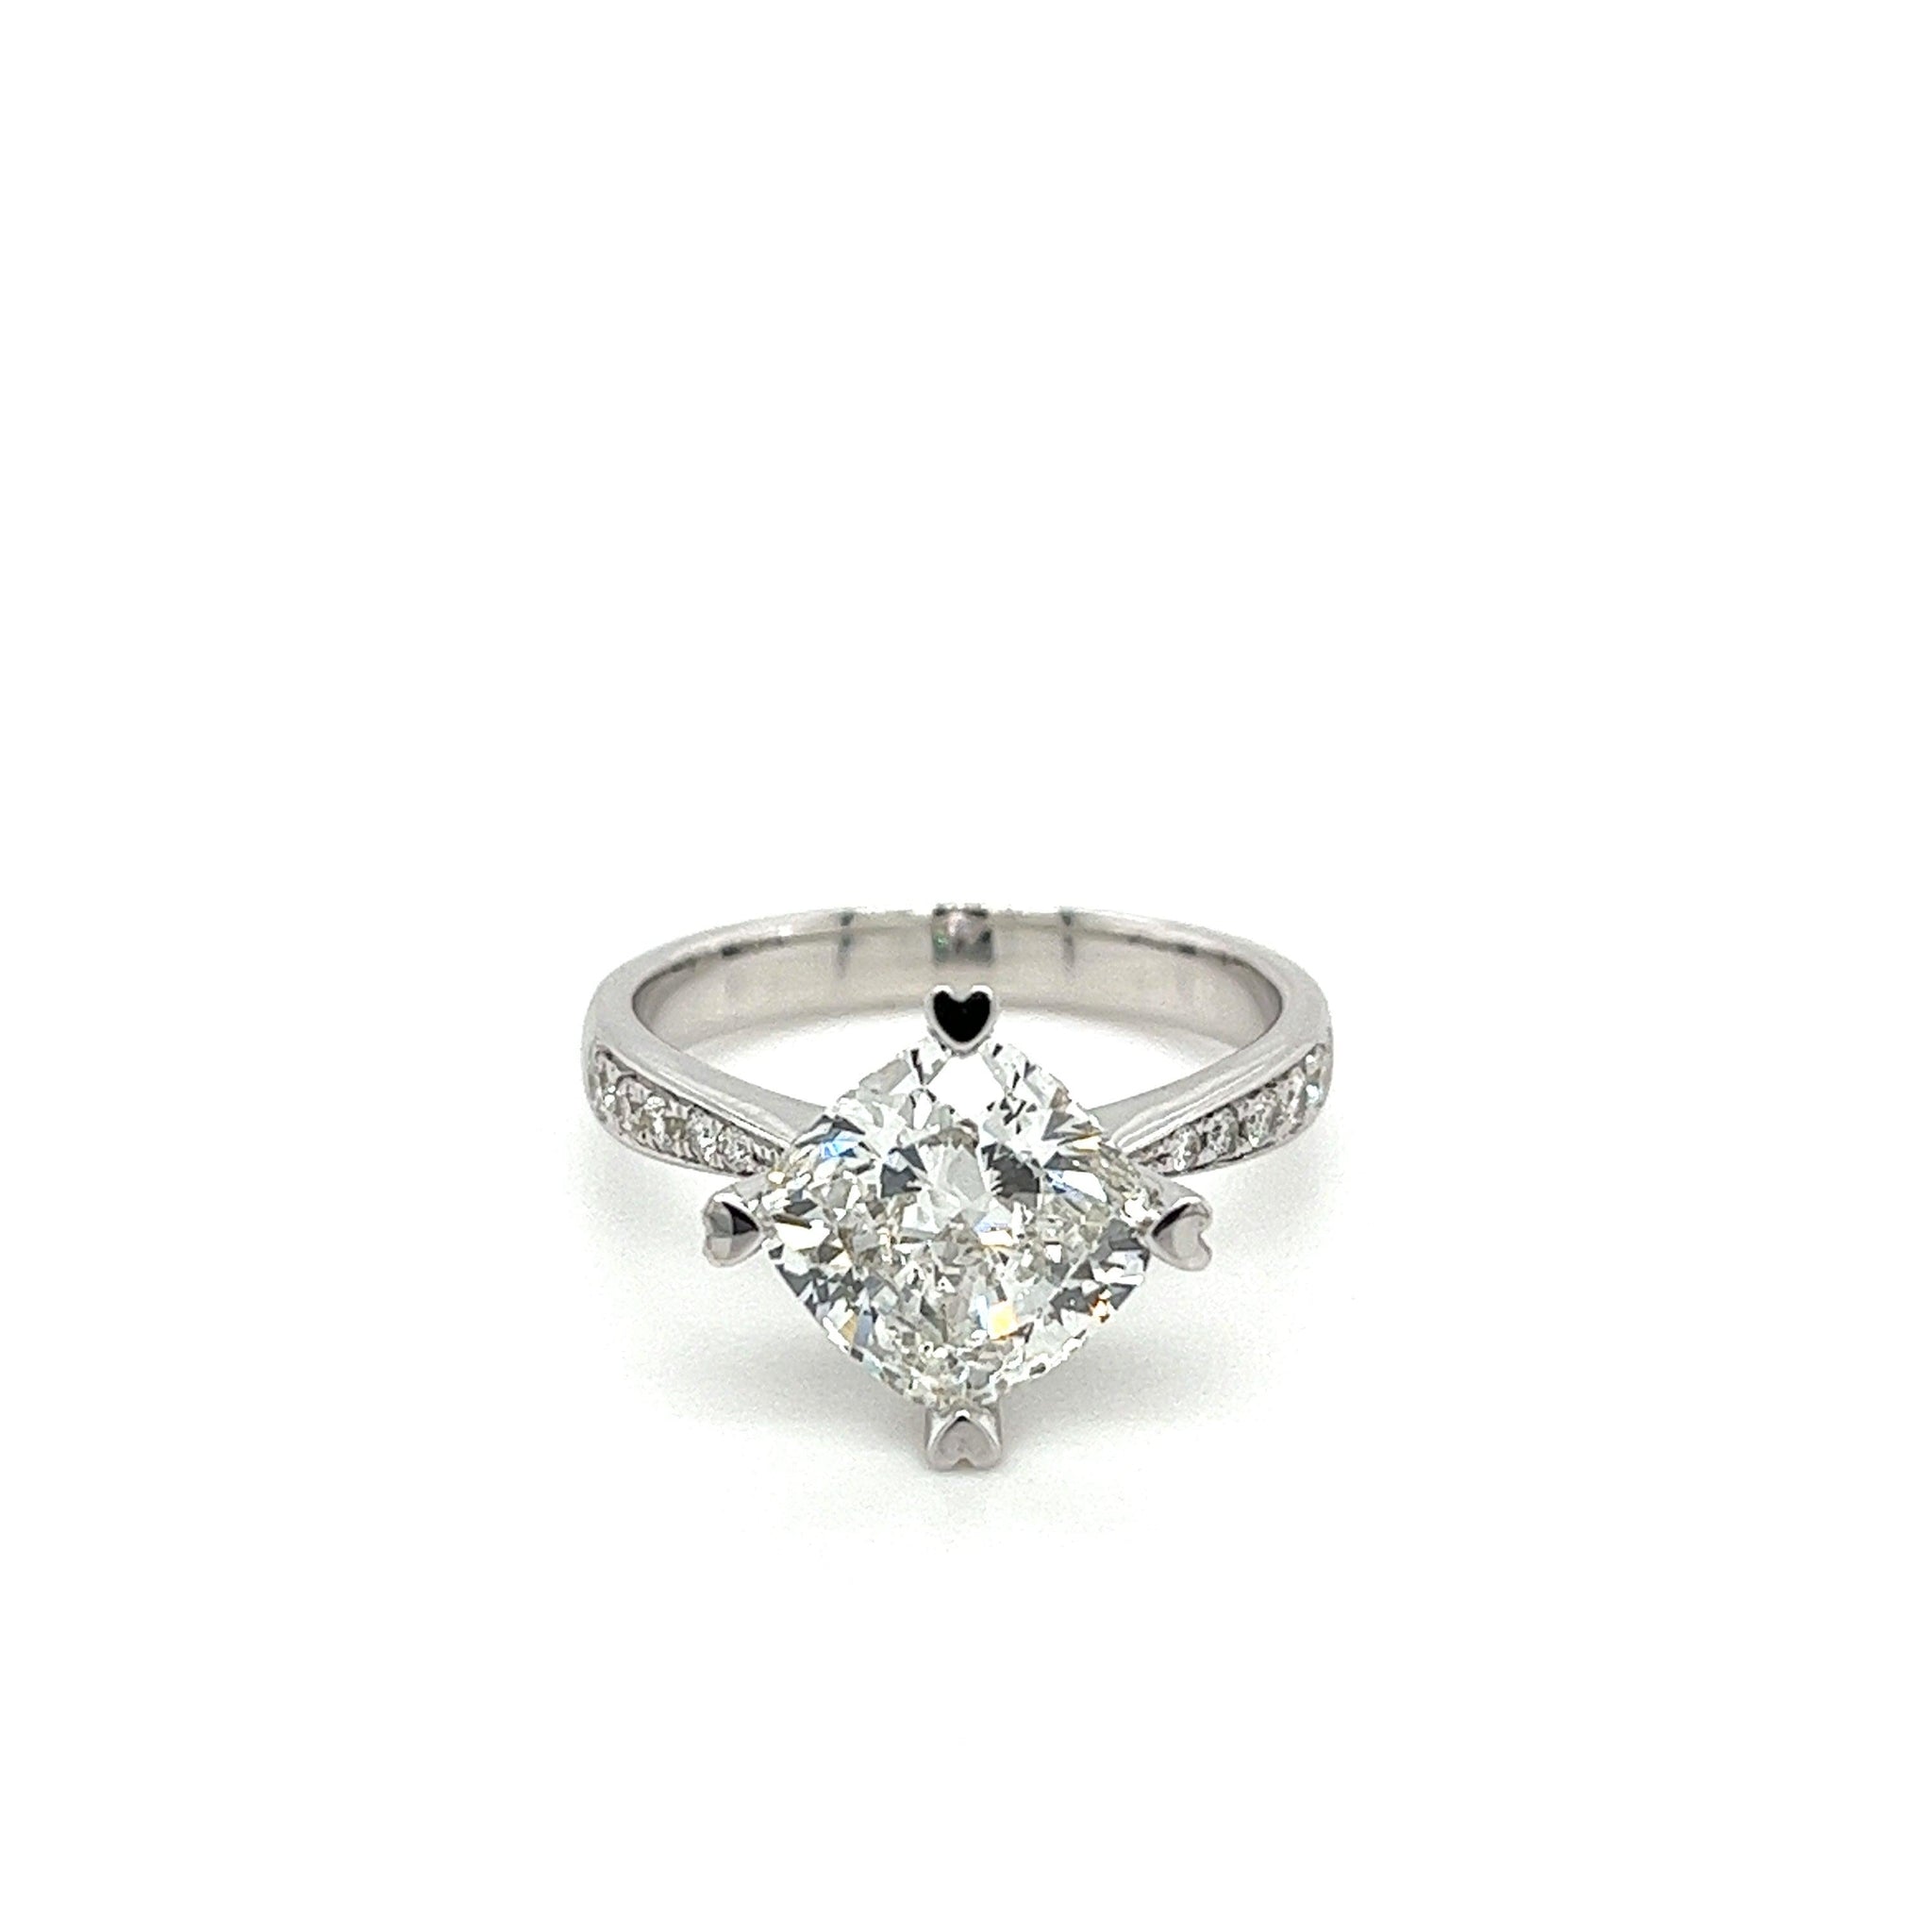 Round Diamond Engagement Ring With Square Halo